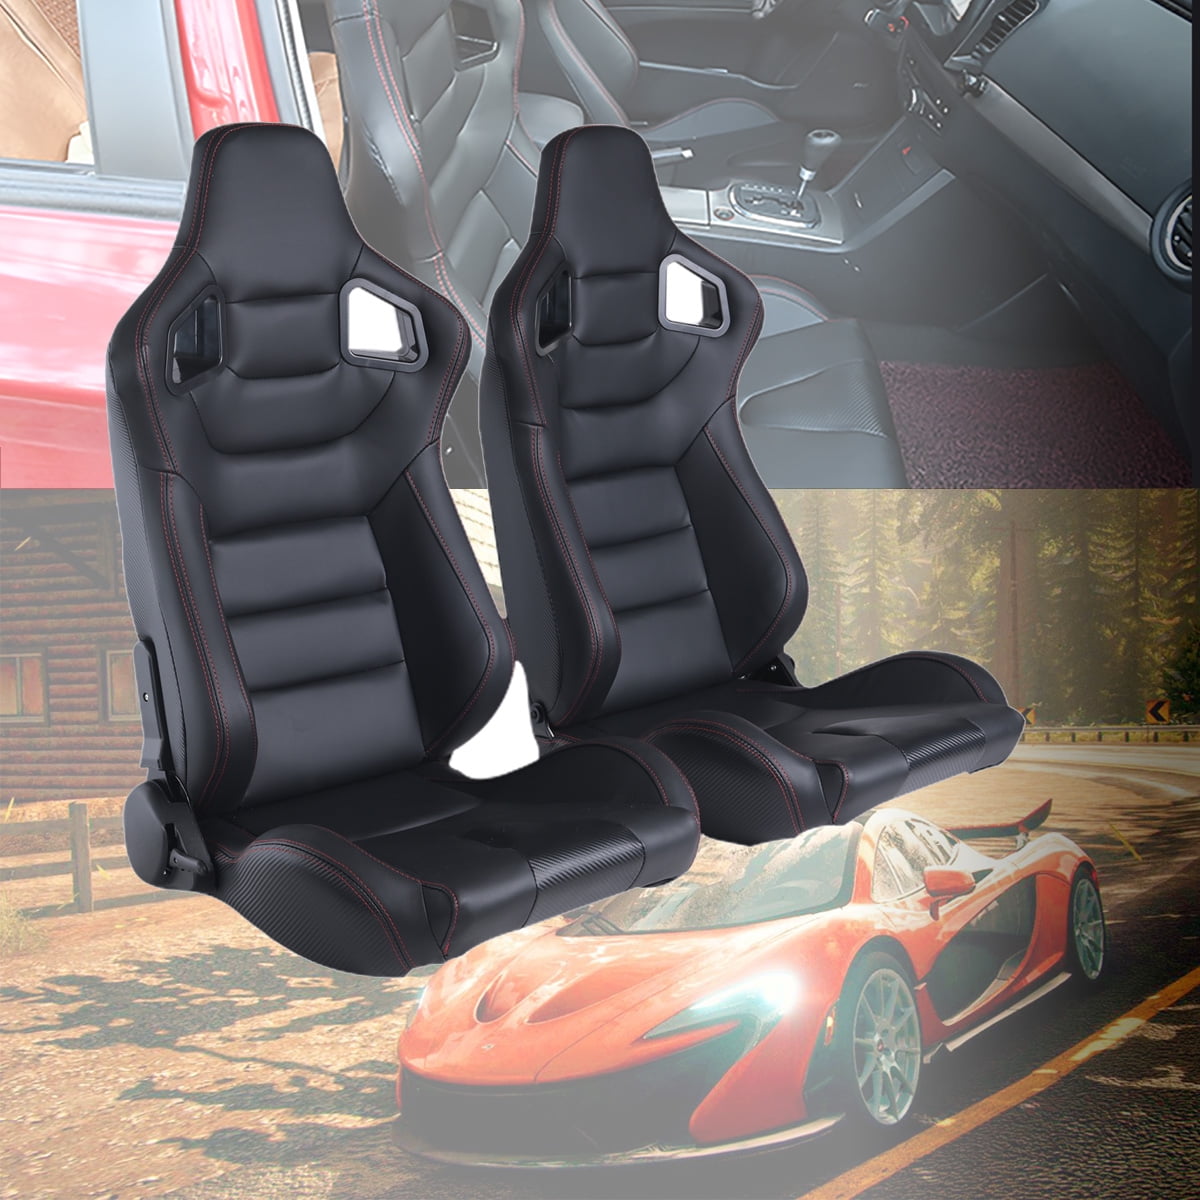 Automotive Racing Seats for Cars Racing Seats 2PCS Universal PVC Leather Racing Seats with Dual Lock Sliders for Front-Back Adjustment Handle-Type Reclining Mechanism 